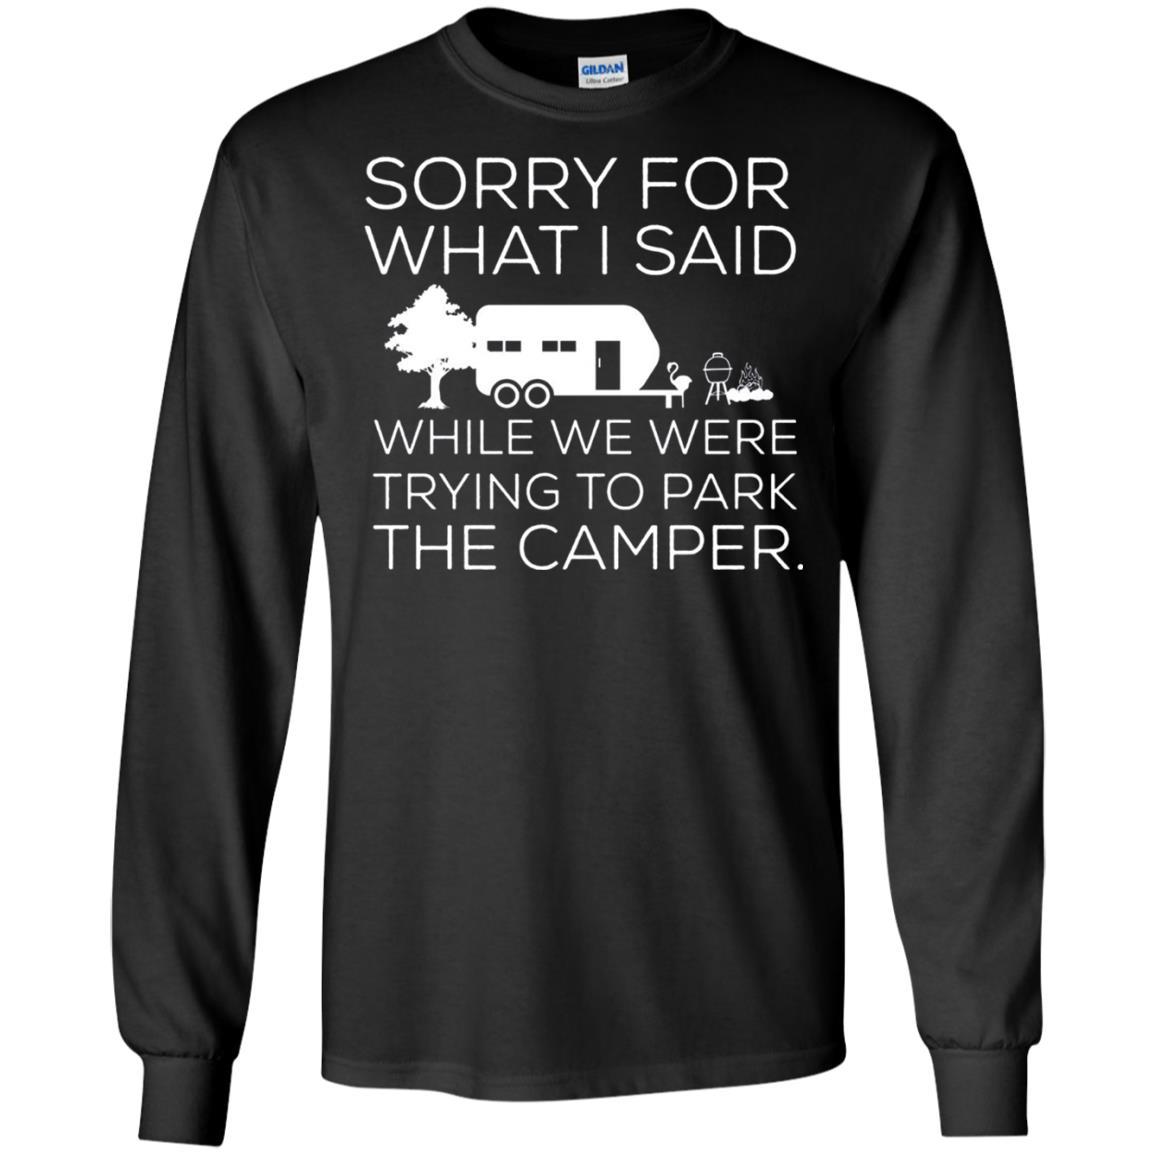 Camping T-shirt We Were Trying To Park The Camper